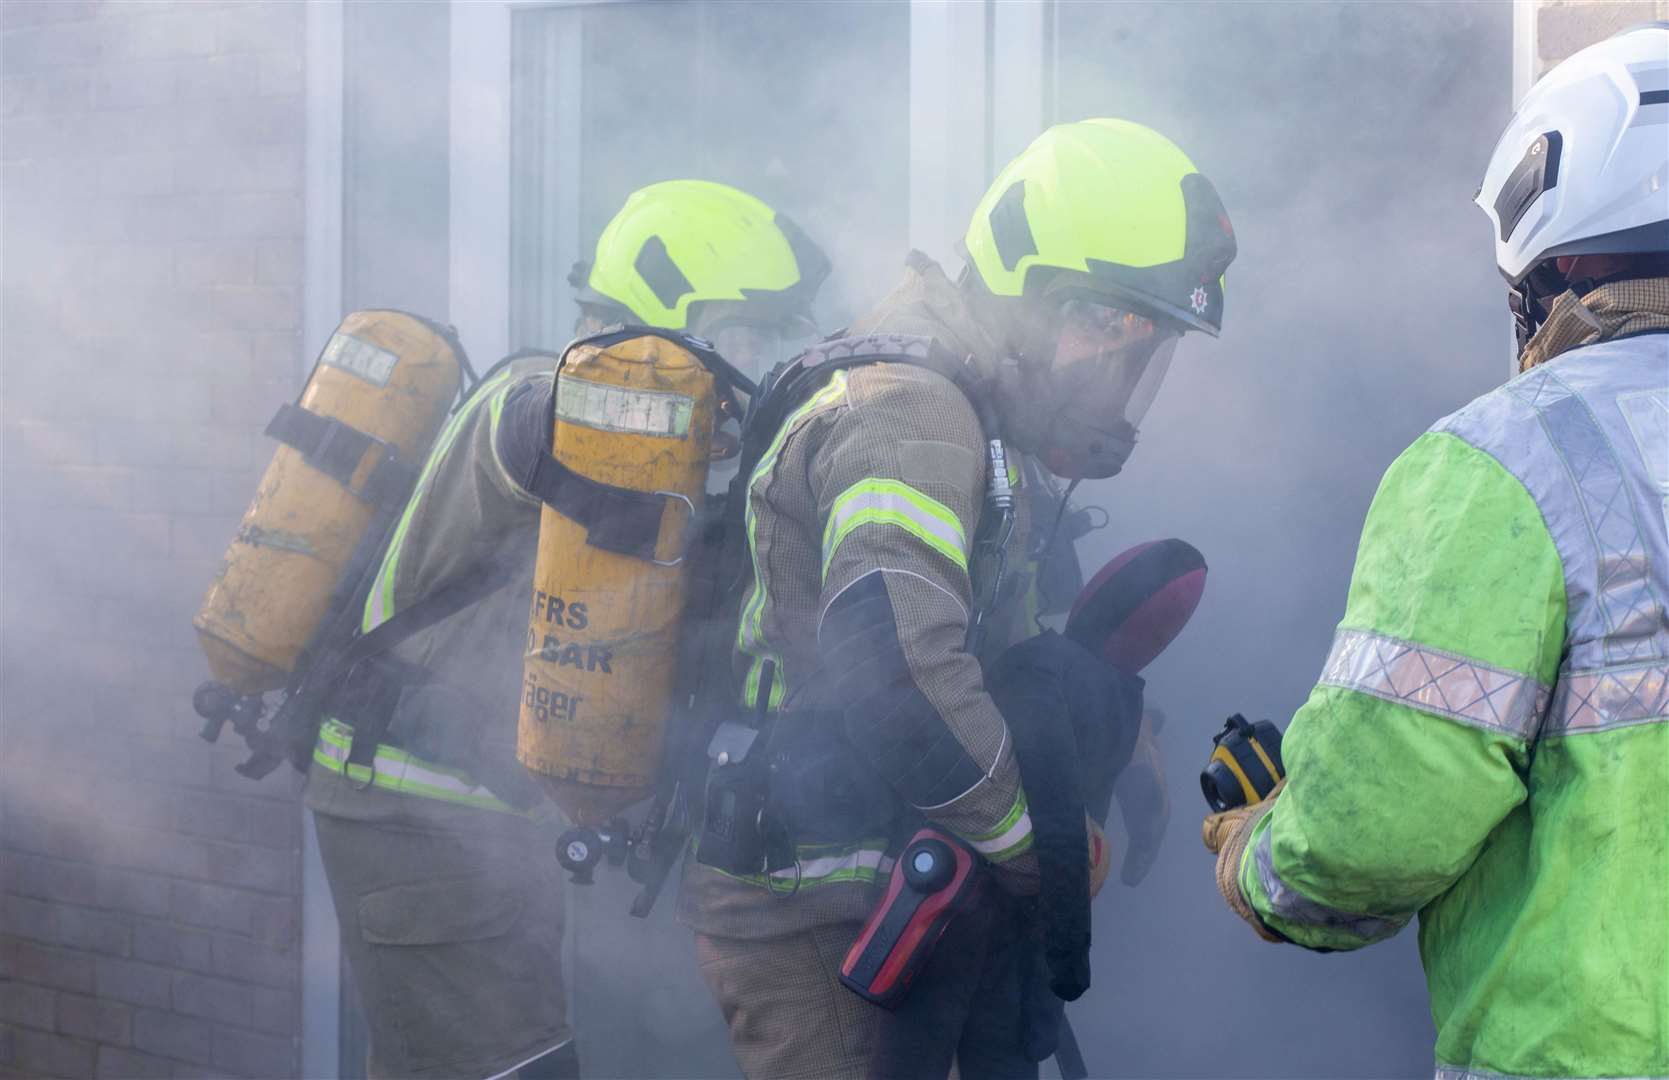 Firefighters were called to a home after a pan of oil sparked a kitchen fire